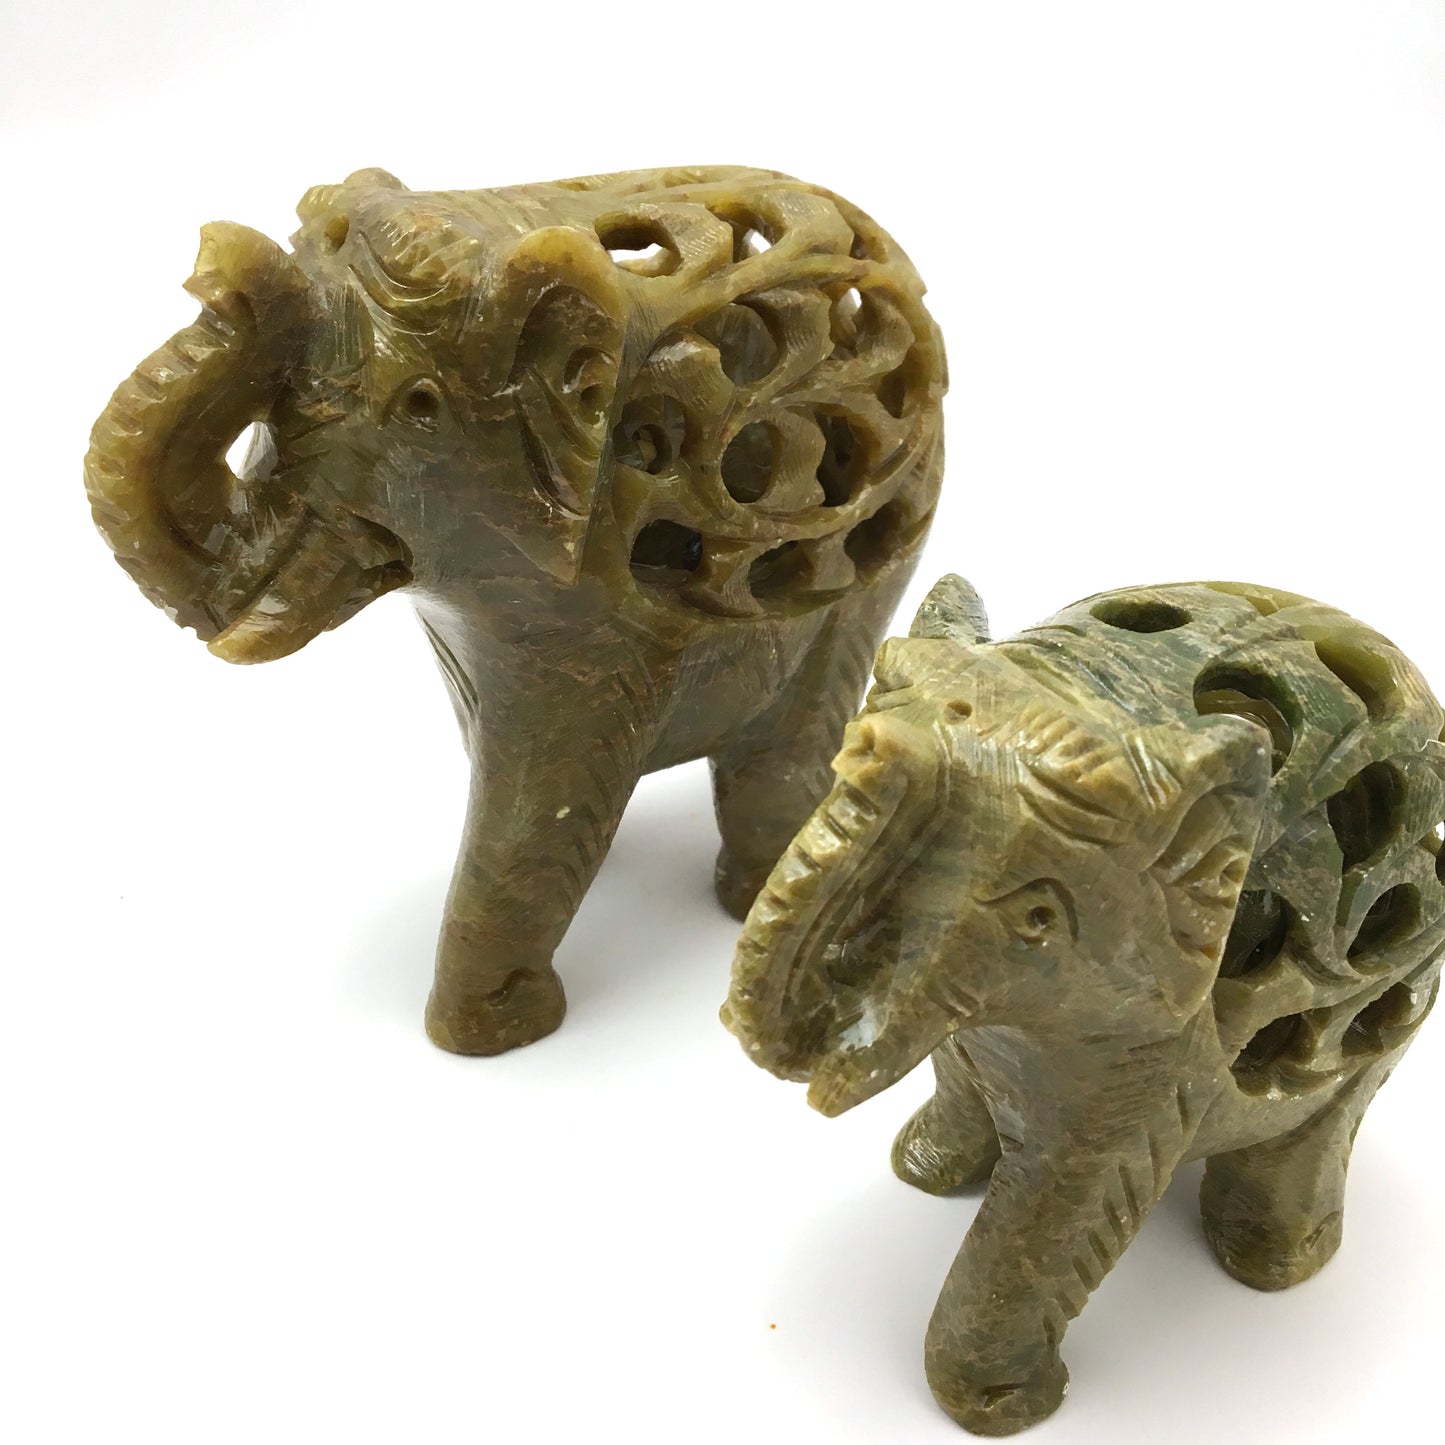 Pair Soapstone Elephants India Handcrafted with Inside Baby Elephant - Green